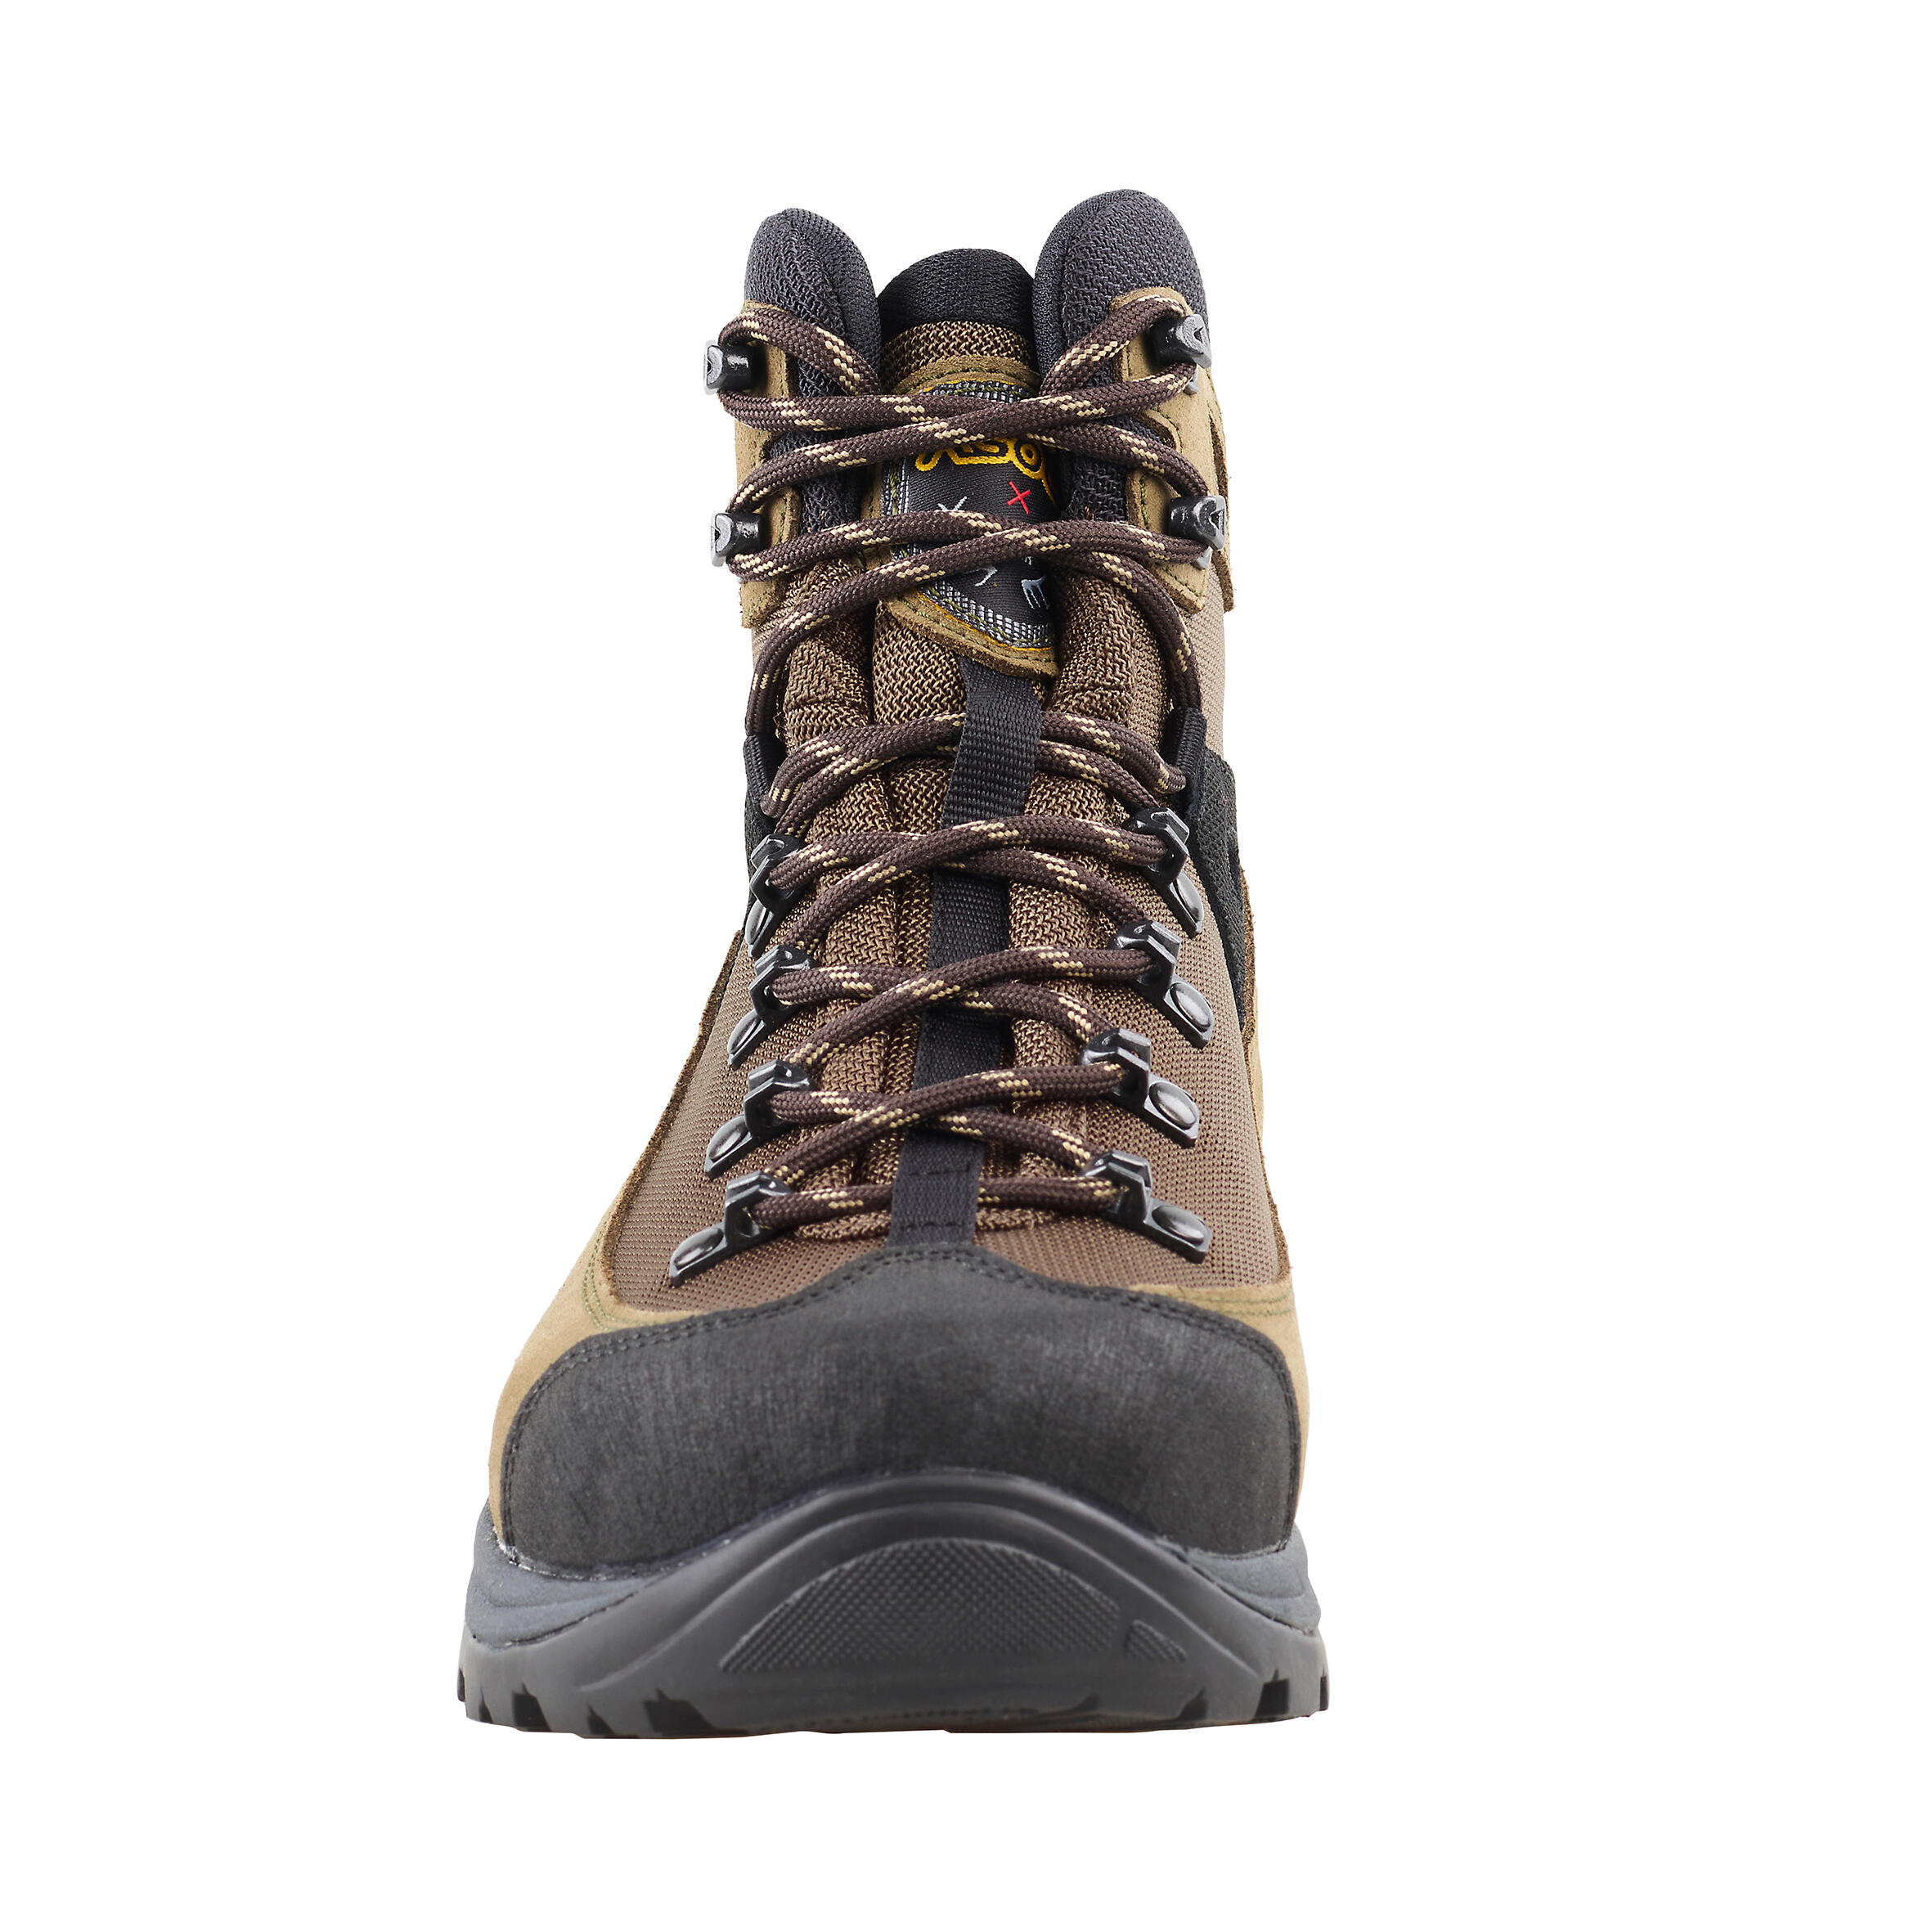 Waterproof Country Sport Boots Asolo X-Hunt Land Gore-Tex Vibram 4/12